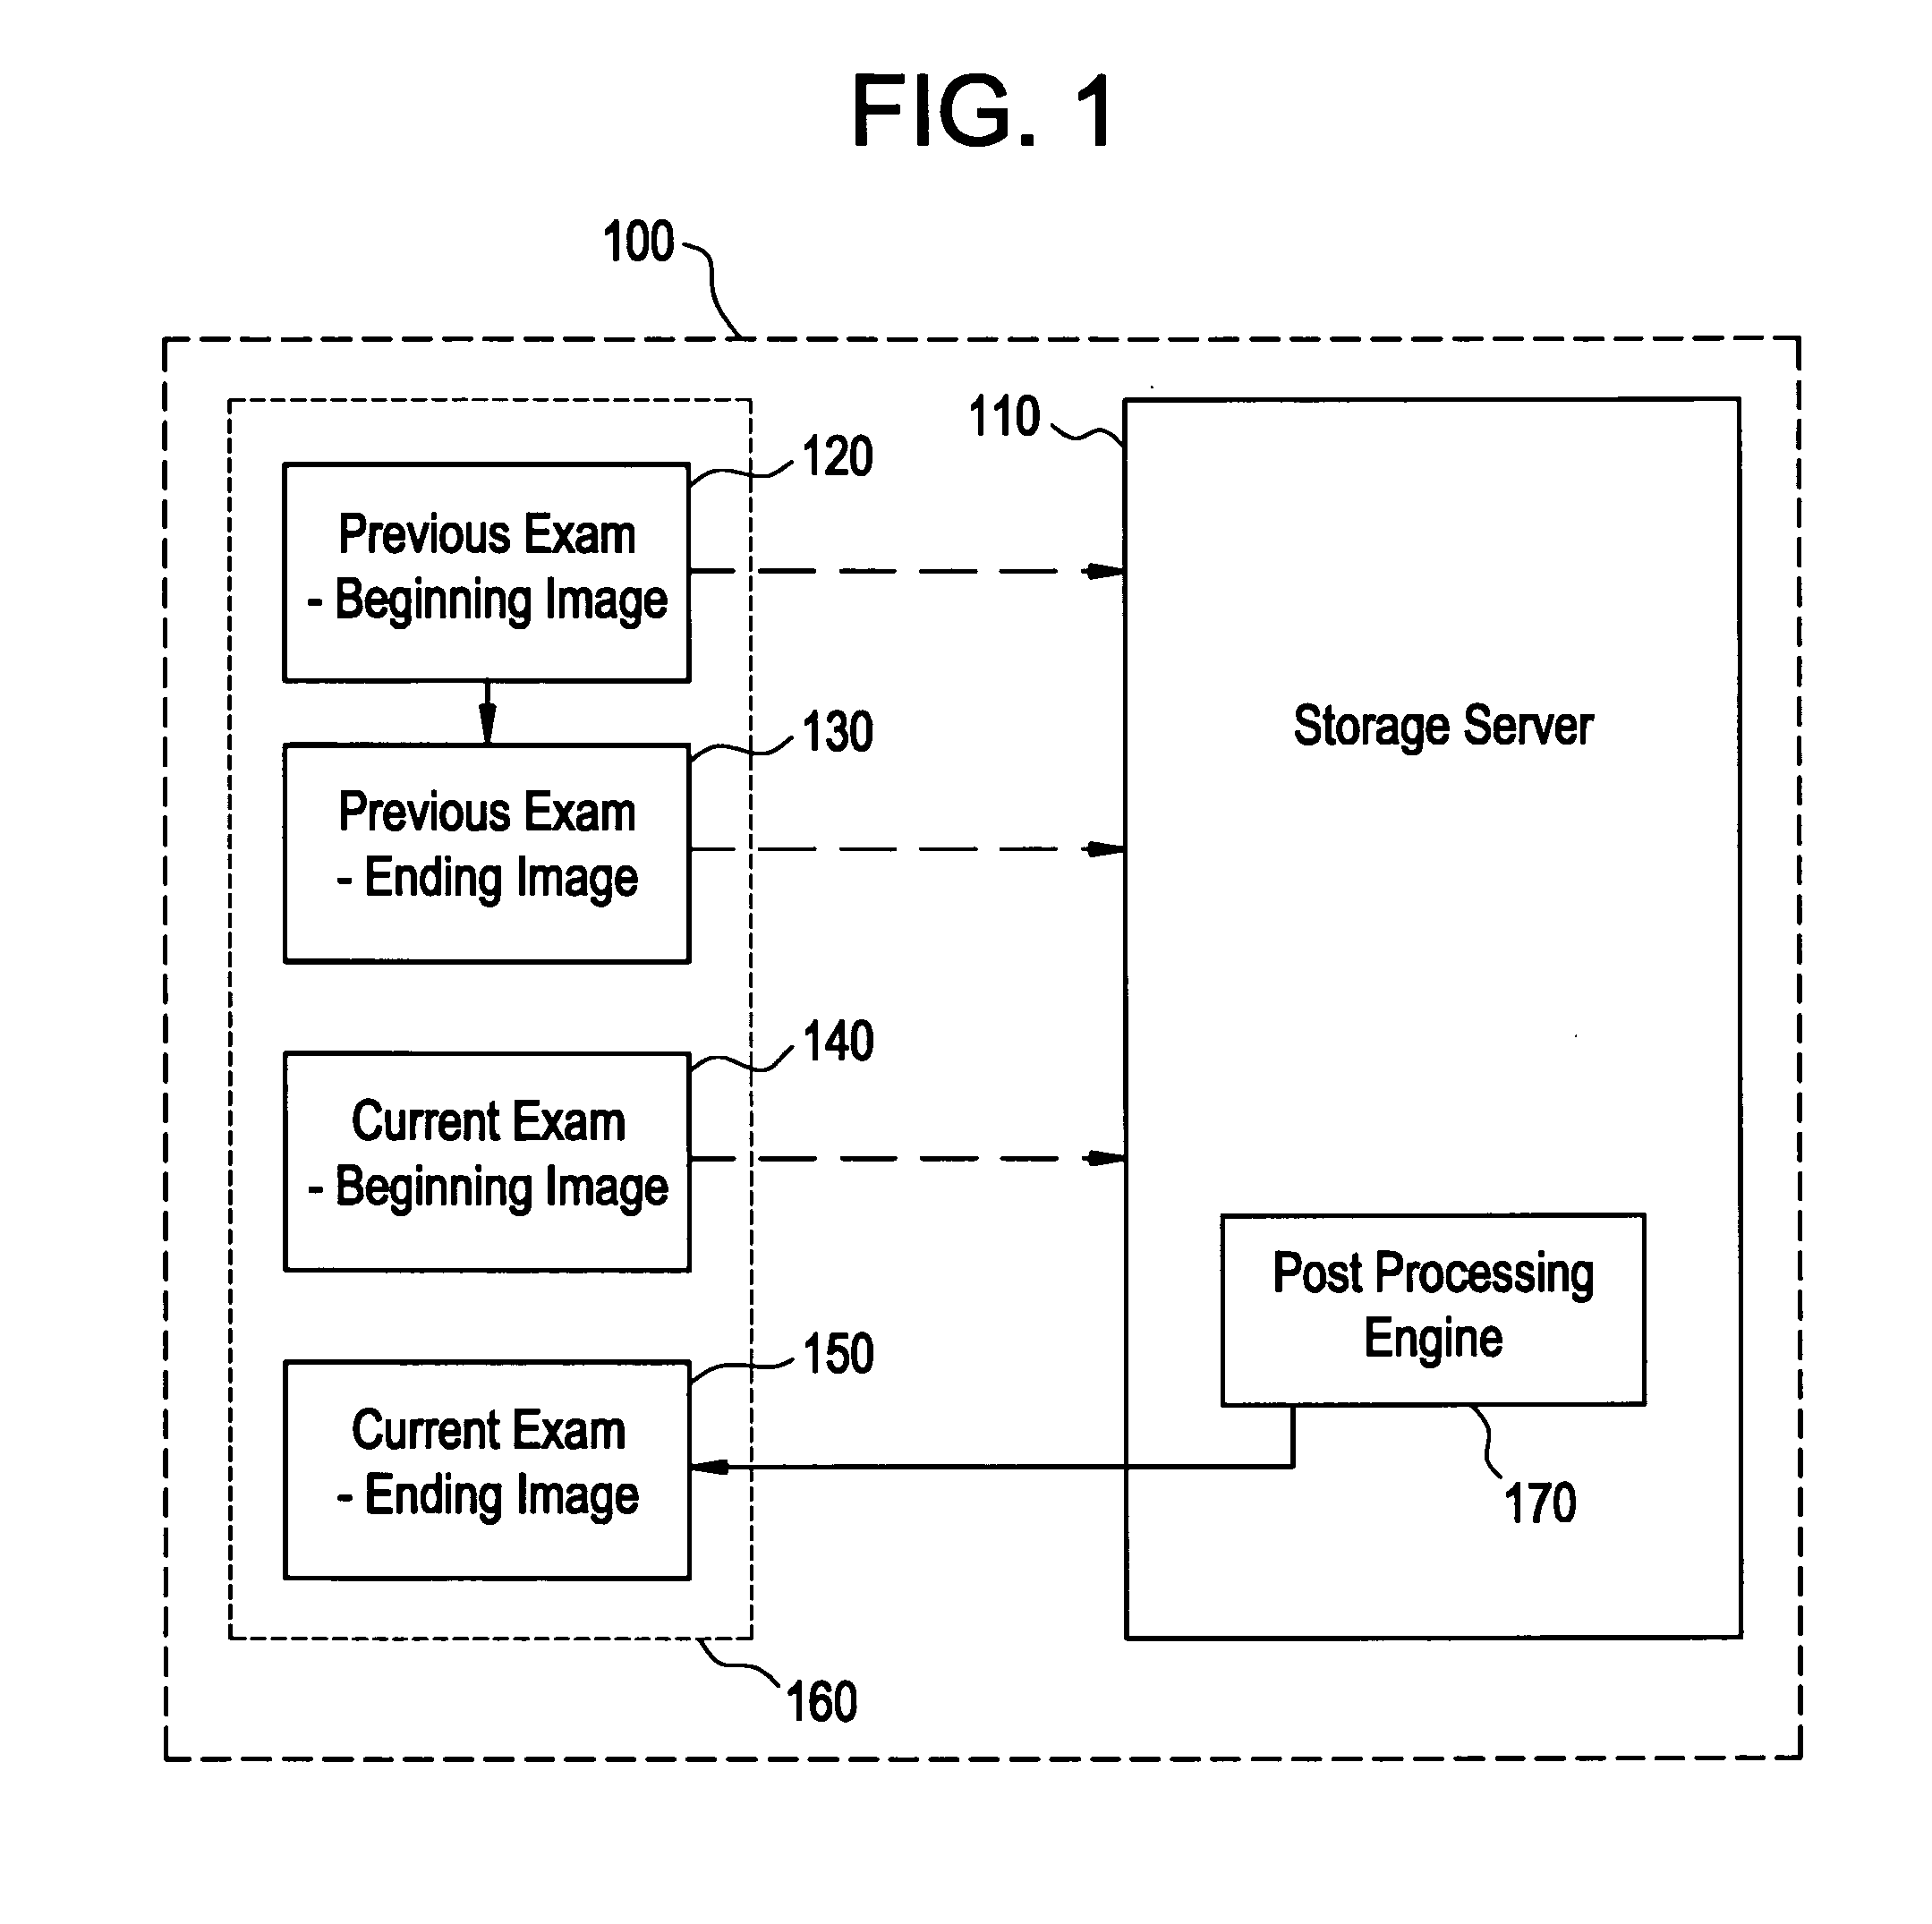 System and method for automatic post processing image generation